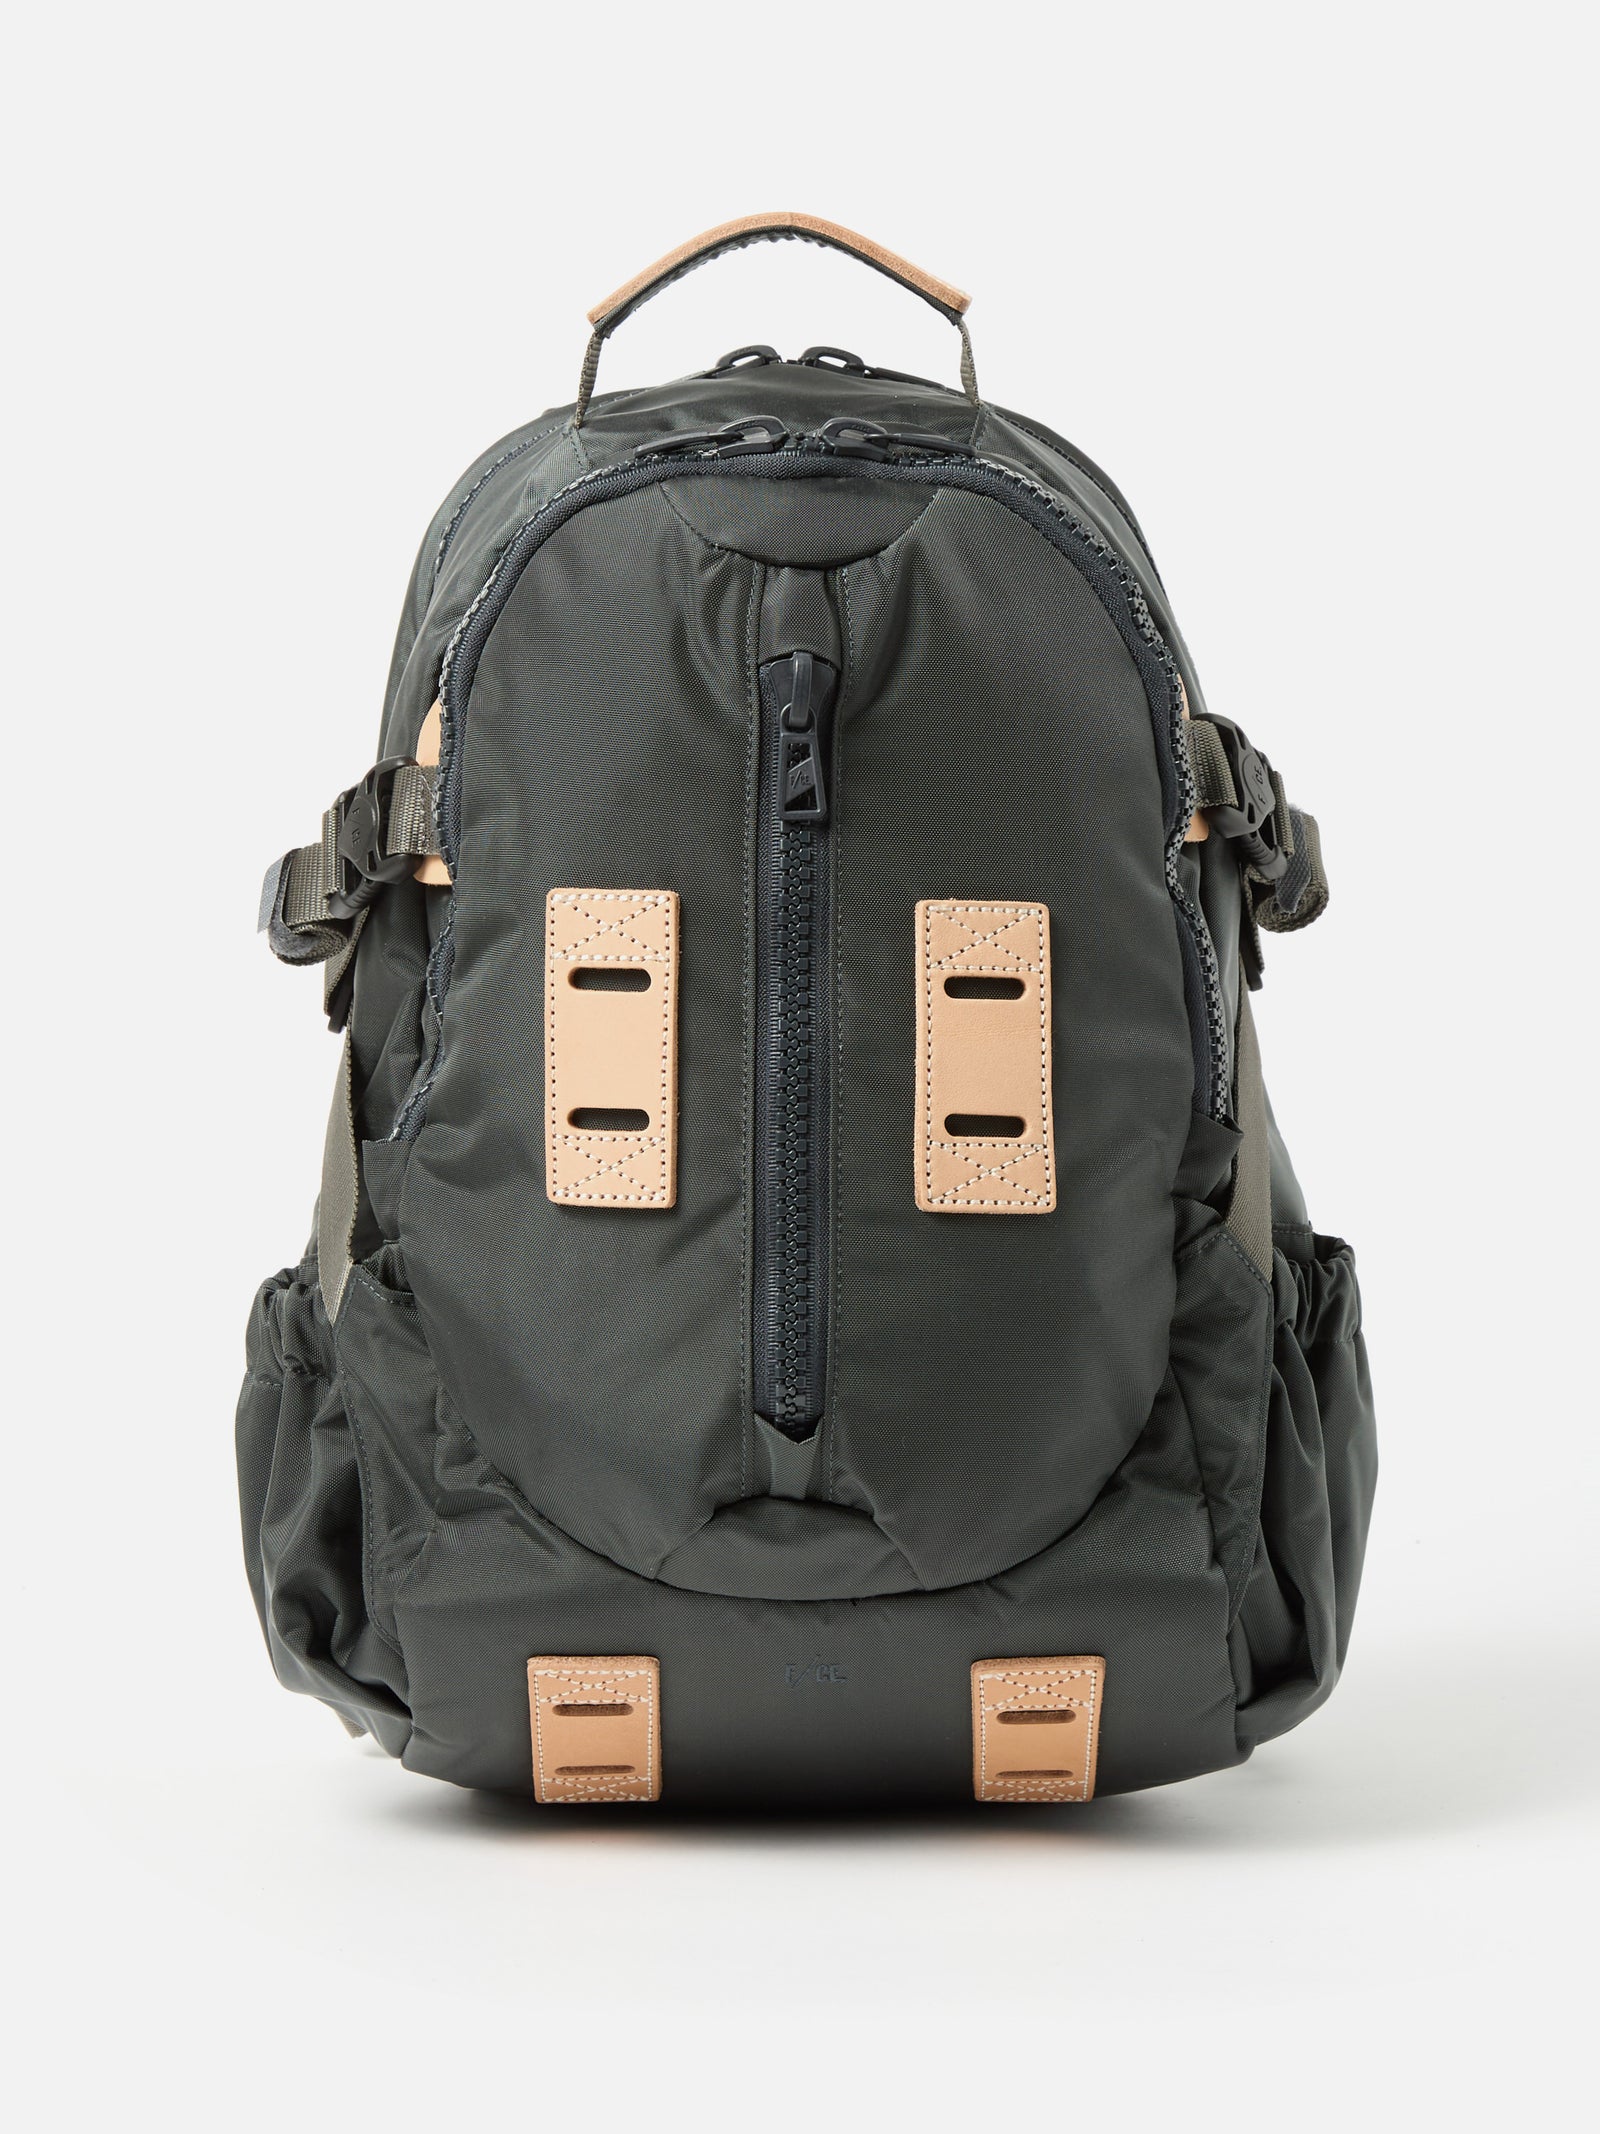 F/CE.® 950 Travel Backpack S in Grey Cordura®